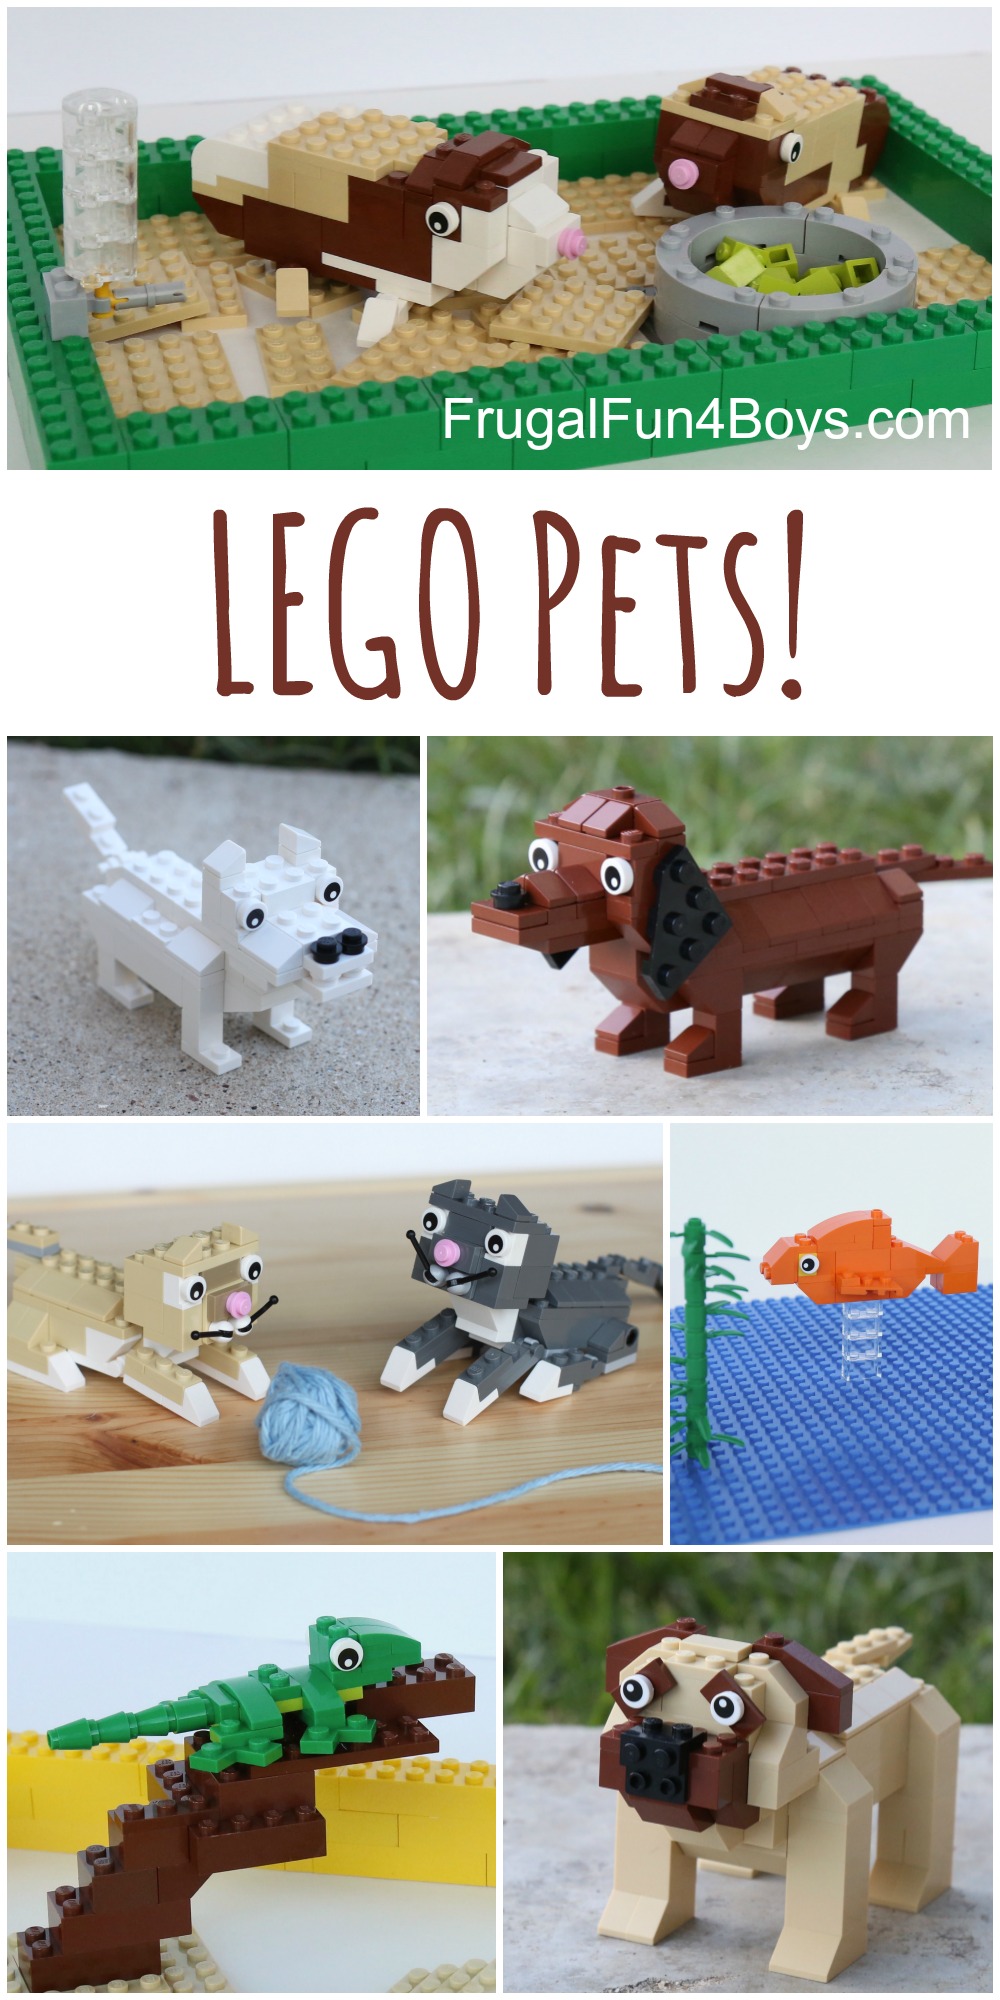 LEGO Pets! Building instructions for dogs, cats, guinea pigs, lizards, and more!